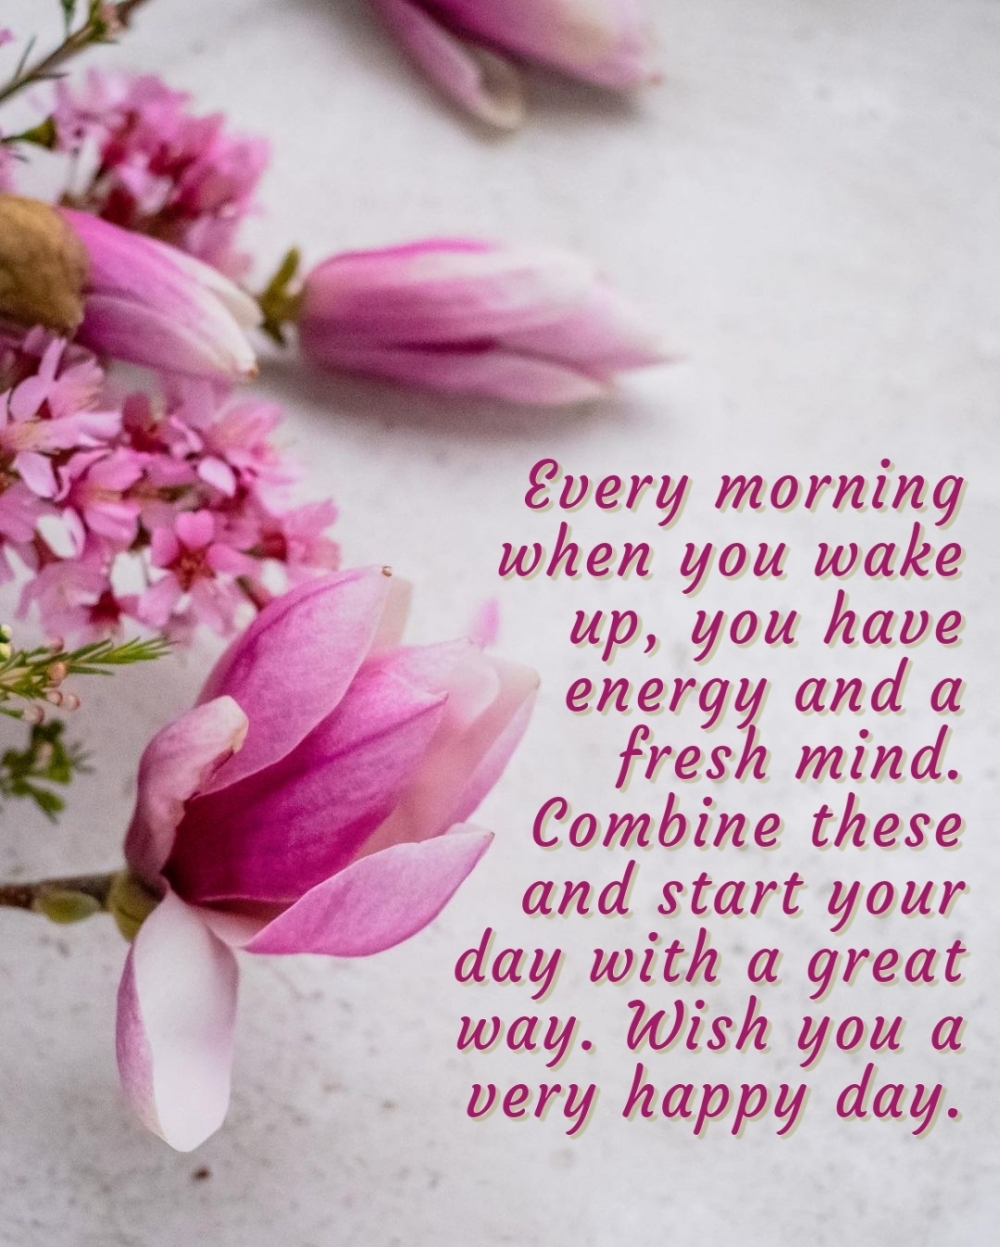 Every morning when you wake up, you have energy and a fresh mind.